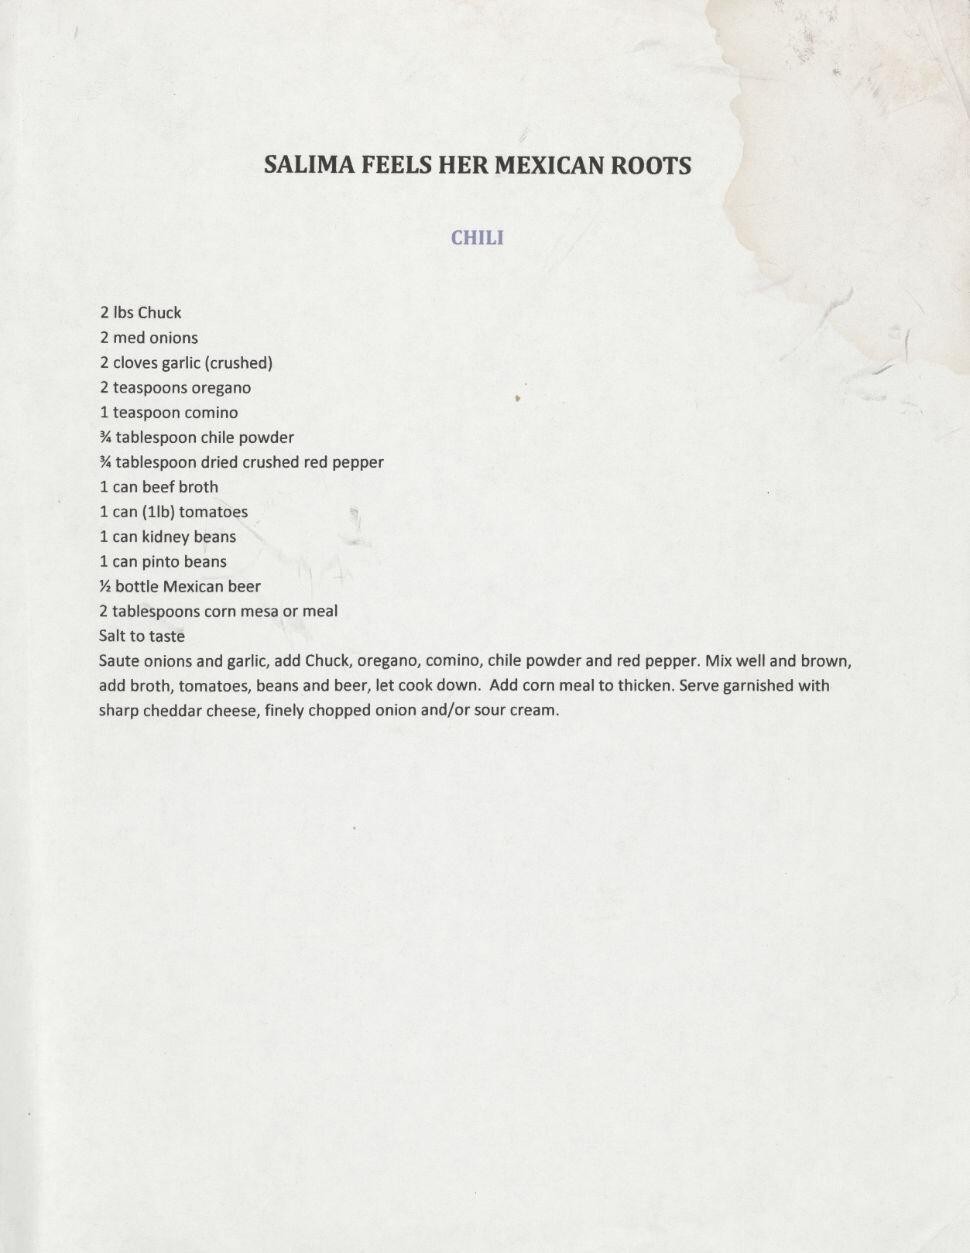 Photo of a printed recipe:<br />
        SALIMA FEELS HER MEXICAN ROOTS <br />
        Chili <br />
        2 lbs Chuck<br />
        2 med onions<br />
        2 cloves garlic (crushed)<br />
        2 teaspoons oregano<br />
        teaspoon comino<br />
        ¾ tablespoon chile powder<br />
        ¾ tablespoon dried crushed red pepper<br />
        1 can beef broth<br />
        1 can (1lb) tomatoes<br />
        1 can kidney beans<br />
        1 can pinto beans<br />
        ½ bottle Mexican beer<br />
        2 tablespoons corn mesa or meal<br />
        Salt to taste<br />
        Saute onions and garlic, add Chuck, oregano, comino, chile powder and red pepper. Mix well and brown,<br />
        add broth, tomatoes, beans and beer, let cook down. Add corn meal to thicken. Serve garnished with<br />
        sharp cheddar cheese, finely chopped onion and/or sour cream.